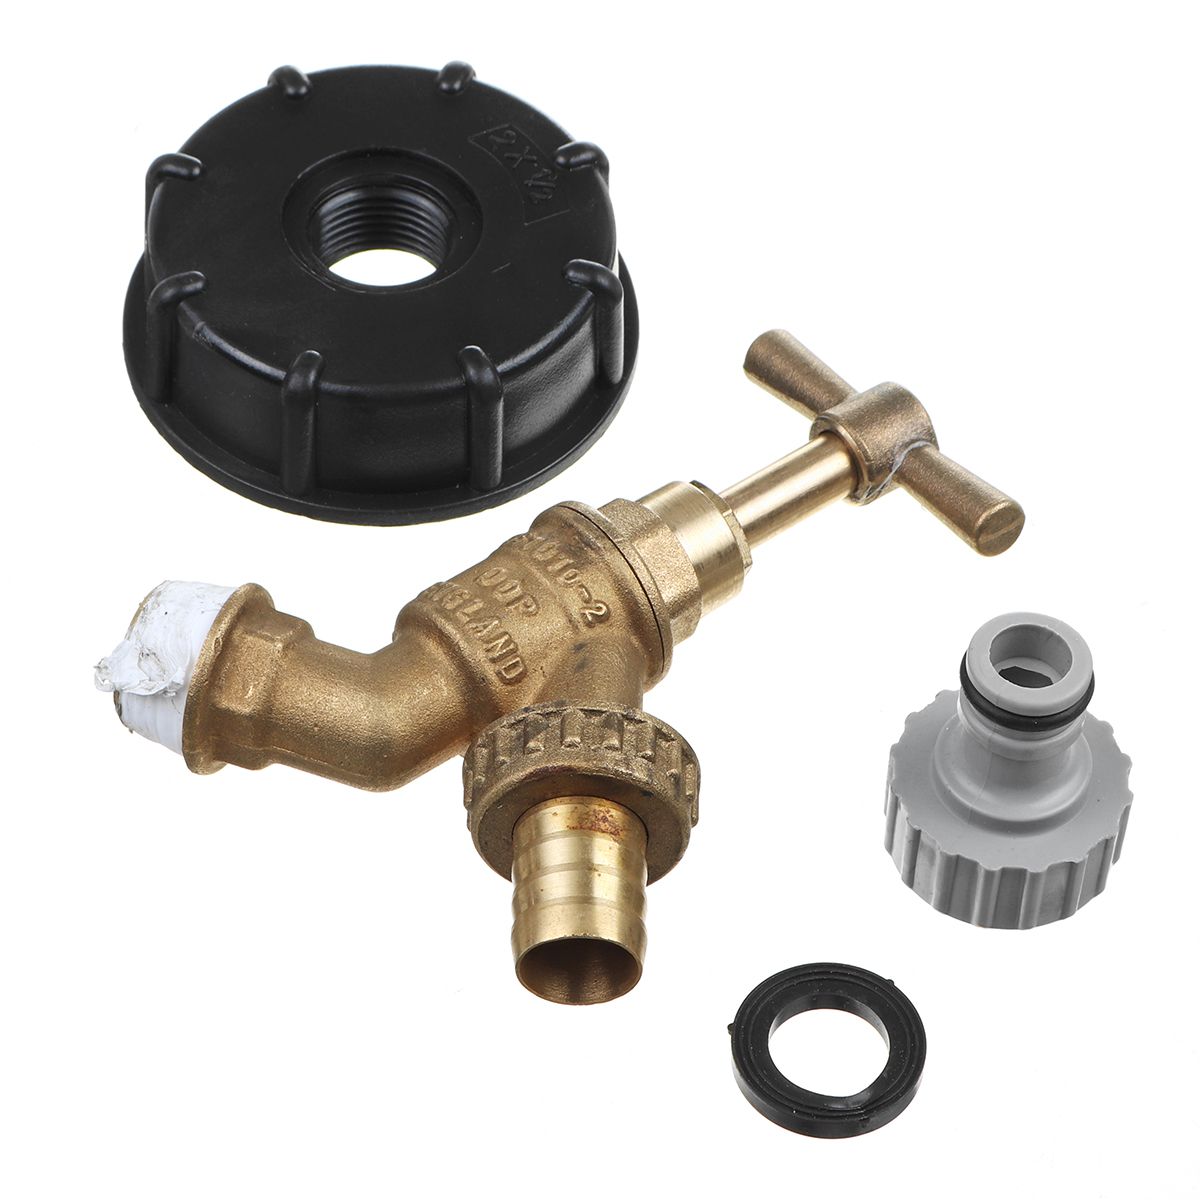 12-Inch-S60x6-IBC-Water-Tank-Adapter-Tap-Outlet-Replacement-Valve-Fitting-for-Garden-Water-Connector-1667230